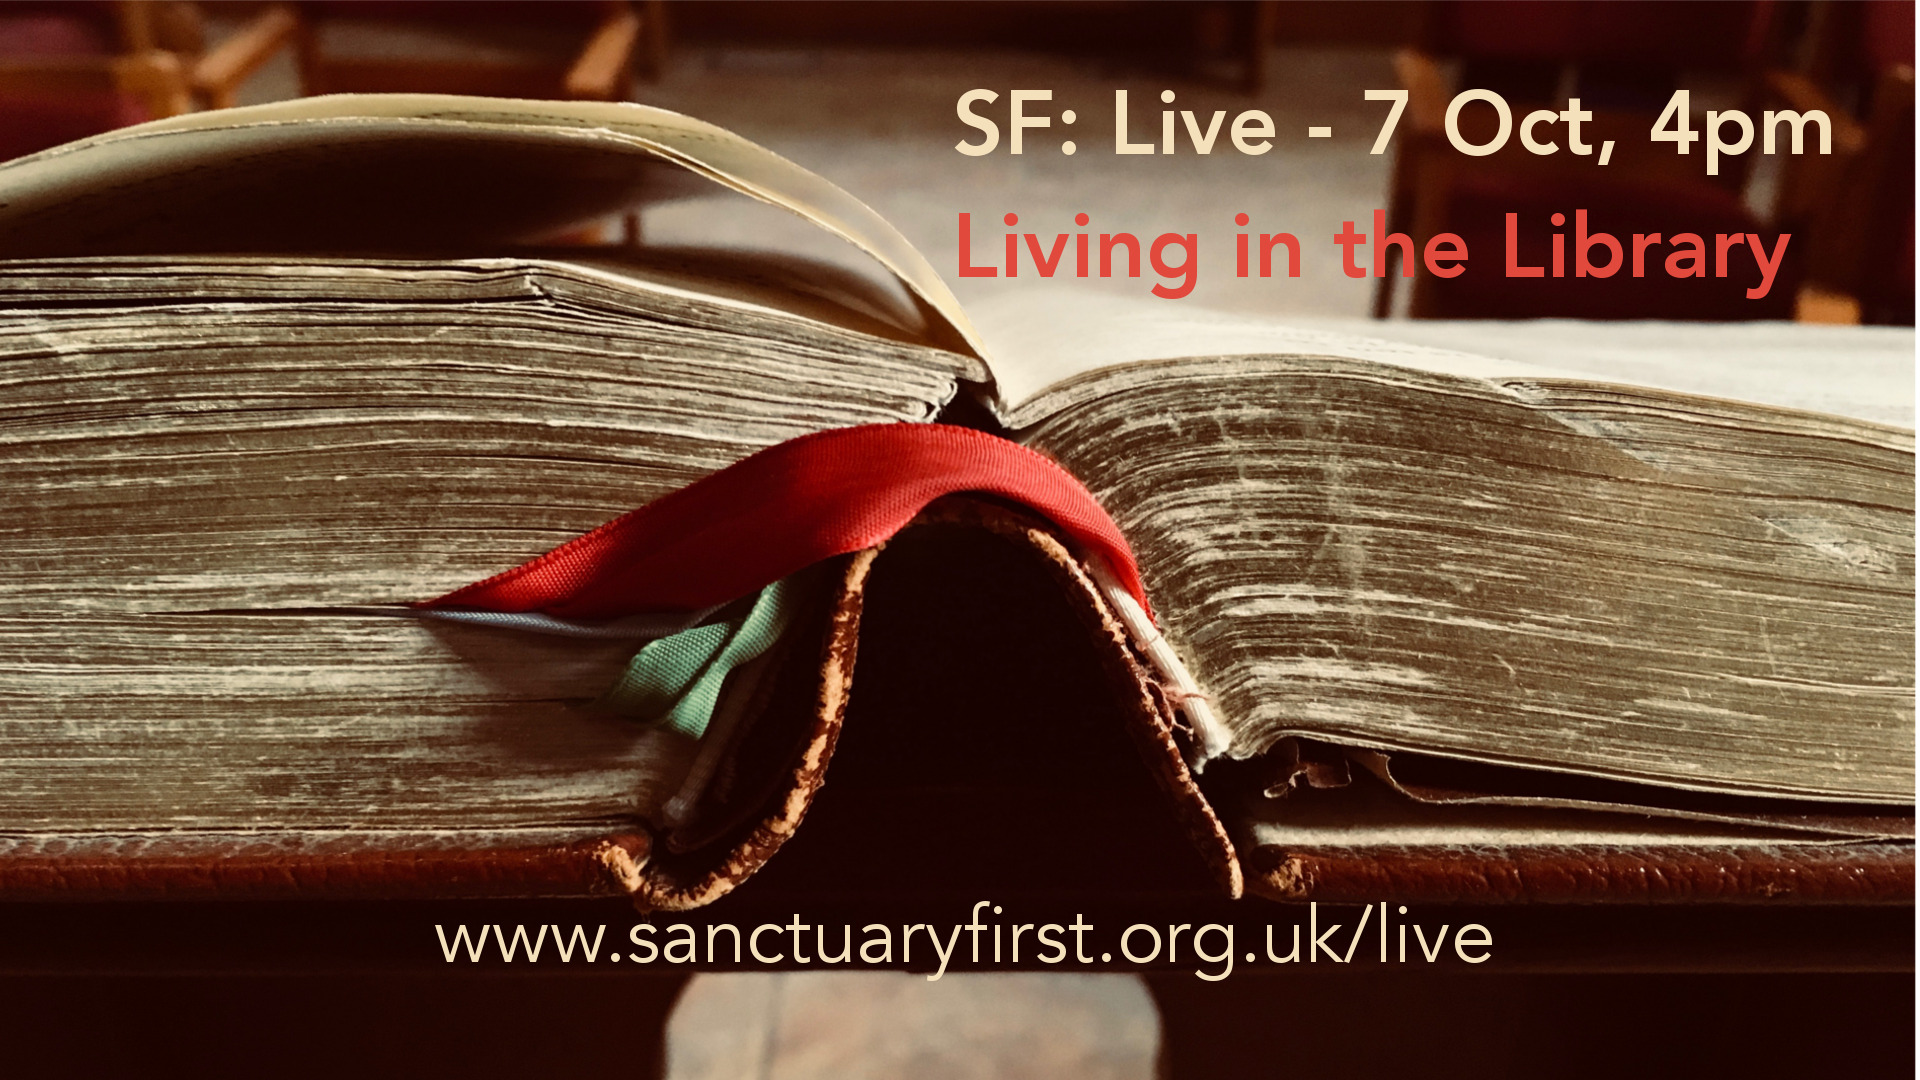 Join us for our SF: Live this Sunday! (7 Oct)